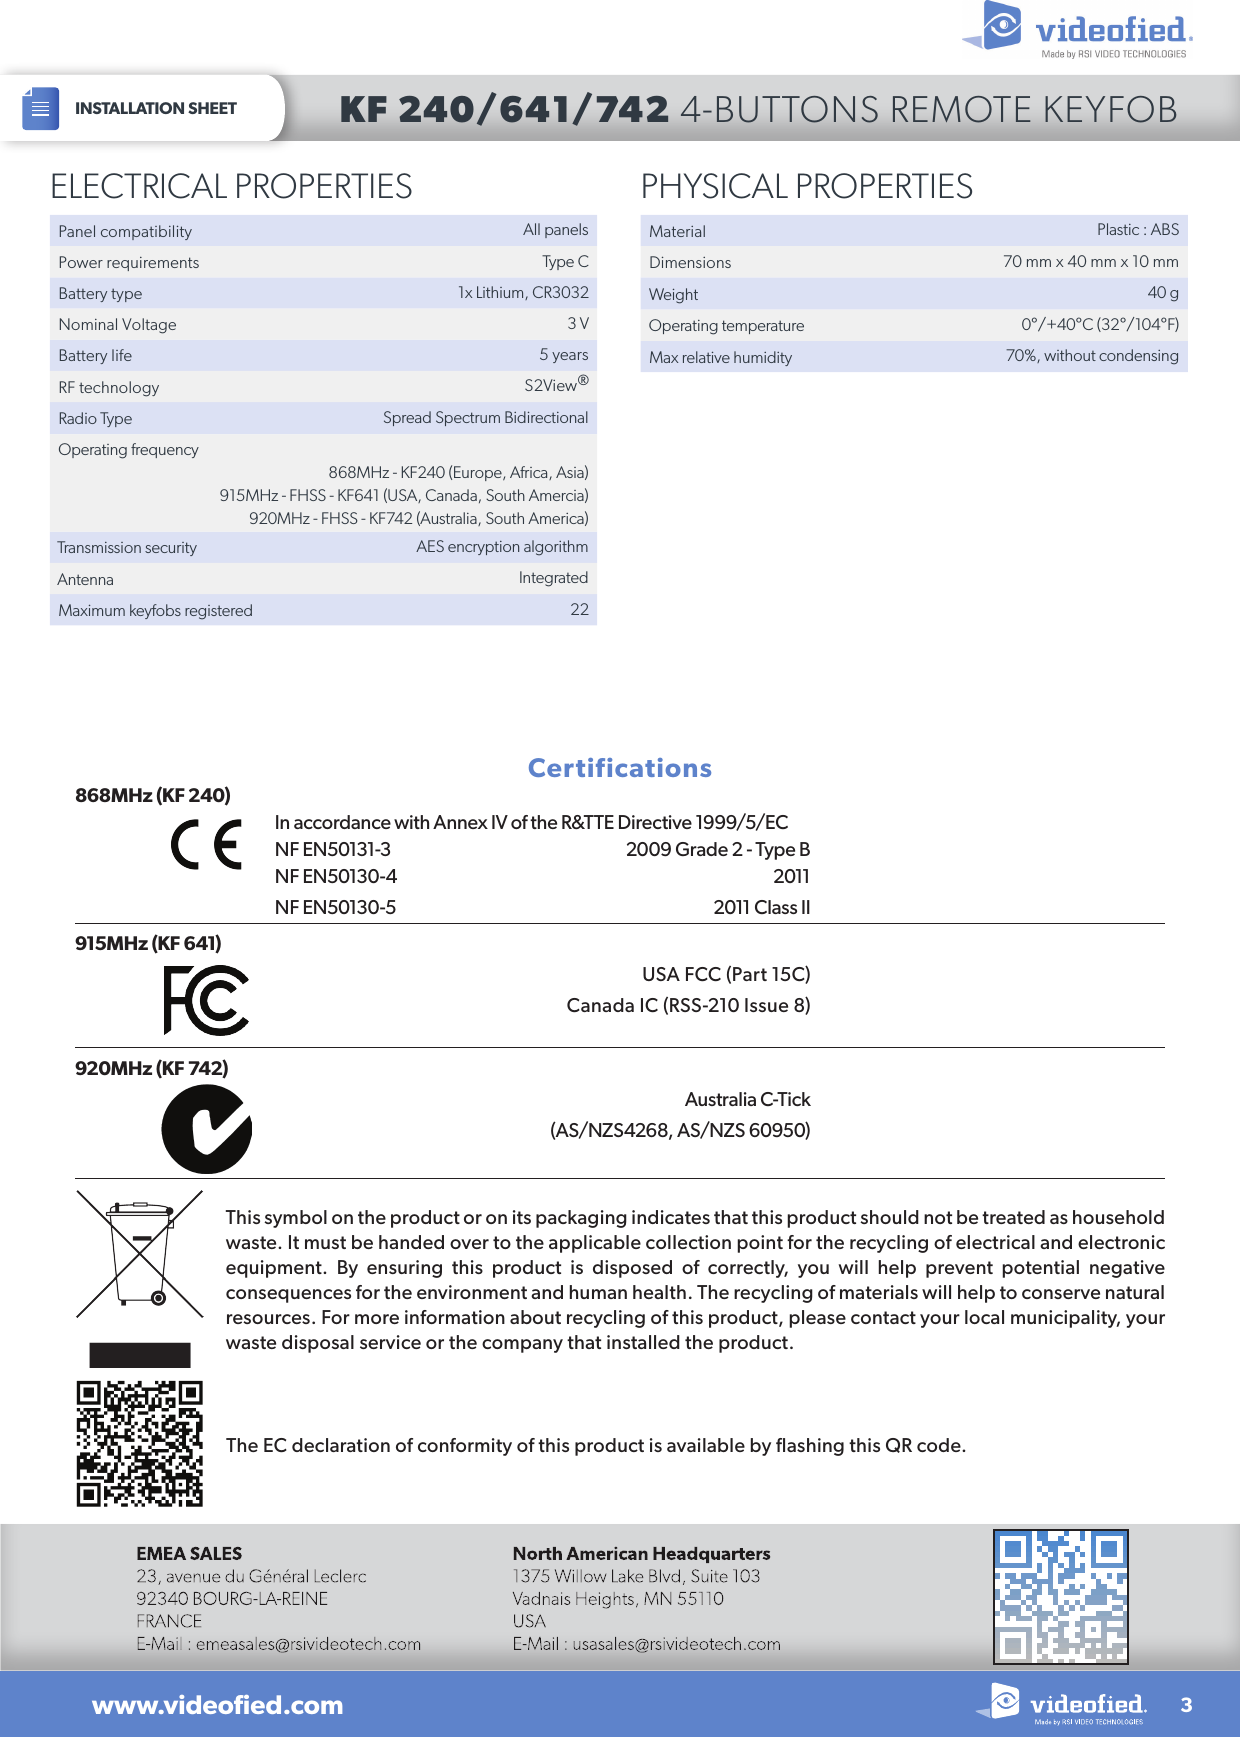 INSTALLATION SHEET3www.videoﬁed.comKF 240/641/742 4-BUTTONS REMOTE KEYFOBCertifications868MHz (KF 240)In accordance with Annex IV of the R&amp;TTE Directive 1999/5/ECNF EN50131-3  2009 Grade 2 - Type BNF EN50130-4  2011NF EN50130-5  2011 Class IIThis symbol on the product or on its packaging indicates that this product should not be treated as household waste. It must be handed over to the applicable collection point for the recycling of electrical and electronic equipment. By ensuring this product is disposed of correctly, you will help prevent potential negative consequences for the environment and human health. The recycling of materials will help to conserve natural resources. For more information about recycling of this product, please contact your local municipality, your waste disposal service or the company that installed the product.915MHz (KF 641) USA FCC (Part 15C)  Canada IC (RSS-210 Issue 8) 920MHz (KF 742)Australia C-Tick(AS/NZS4268, AS/NZS 60950)ELECTRICAL PROPERTIESPanel compatibility All panelsPower requirements Type CBattery type 1x Lithium, CR3032Nominal Voltage 3 VBattery life 5 yearsRF technology S2View®Radio Type Spread Spectrum BidirectionalOperating frequency868MHz - KF240 (Europe, Africa, Asia)915MHz - FHSS - KF641 (USA, Canada, South Amercia)920MHz - FHSS - KF742 (Australia, South America)Transmission security AES encryption algorithmAntenna IntegratedMaximum keyfobs registered 22PHYSICAL PROPERTIESMaterial Plastic : ABSDimensions 70 mm x 40 mm x 10 mmWeight 40 gOperating temperature 0°/+40°C (32°/104°F)Max relative humidity 70%, without condensingThe EC declaration of conformity of this product is available by flashing this QR code.